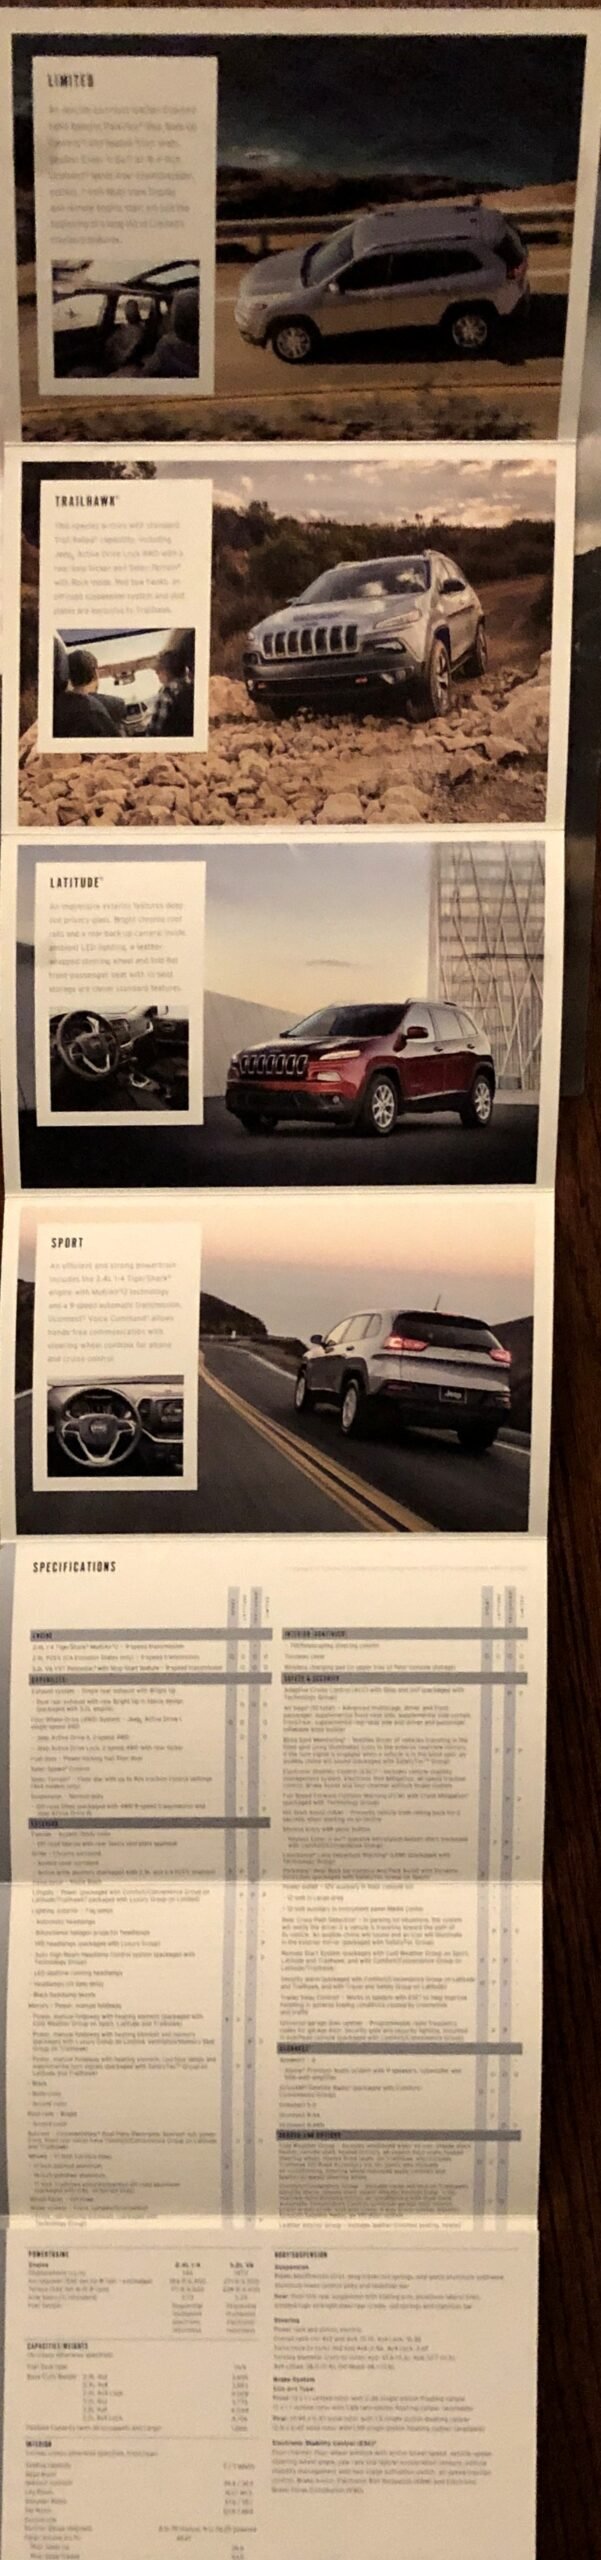 Jeep Cherokee Brochure Fold-out